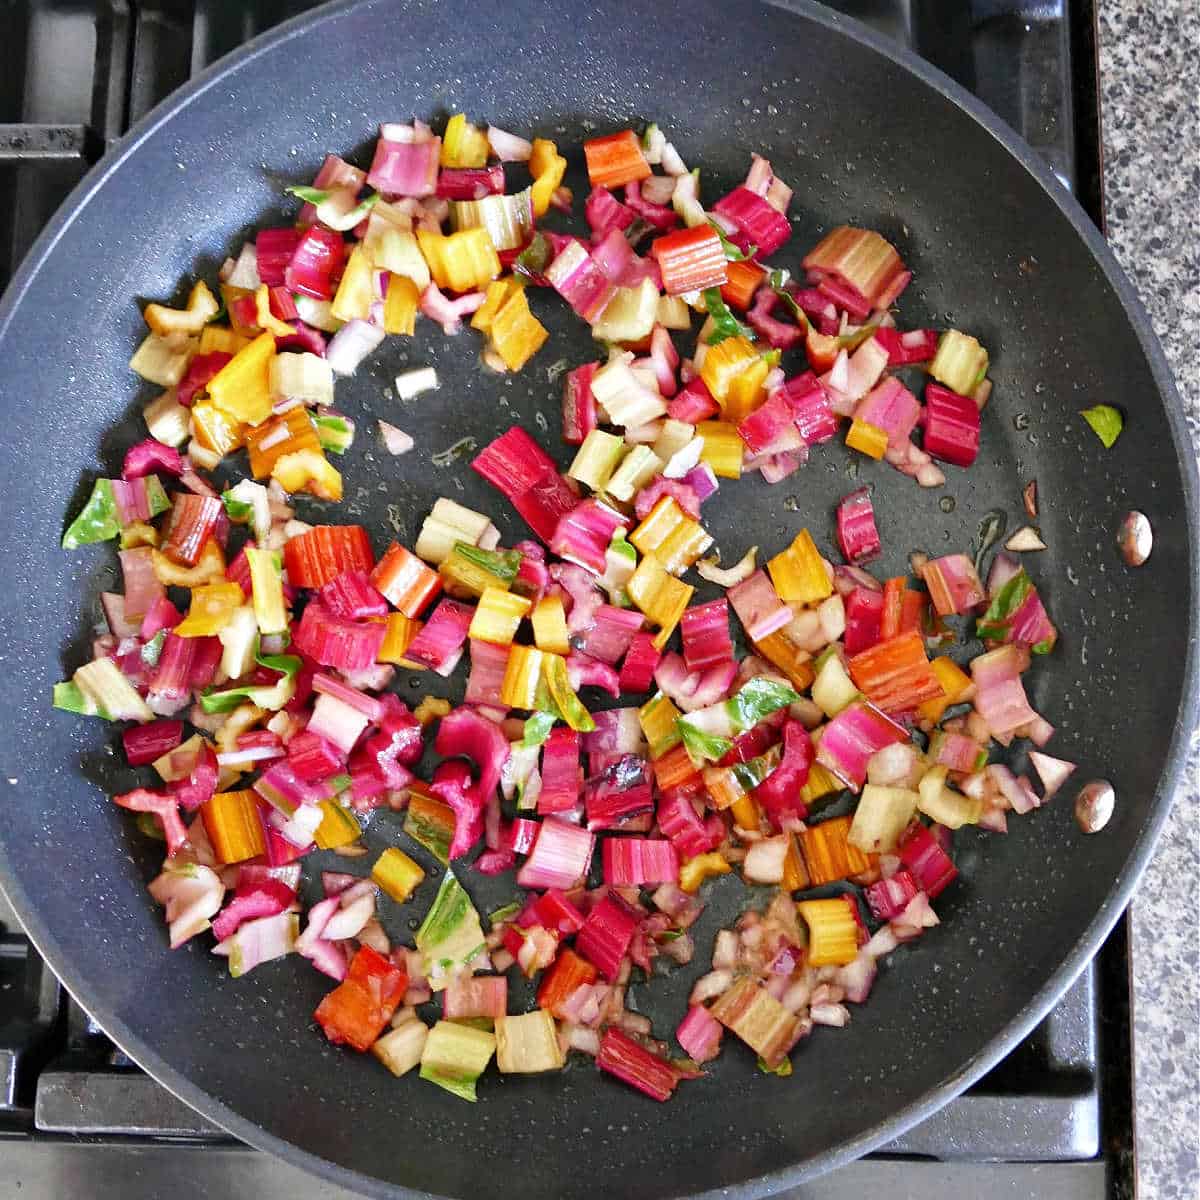 rainbow chard stems cooking in olive oil in a skillet